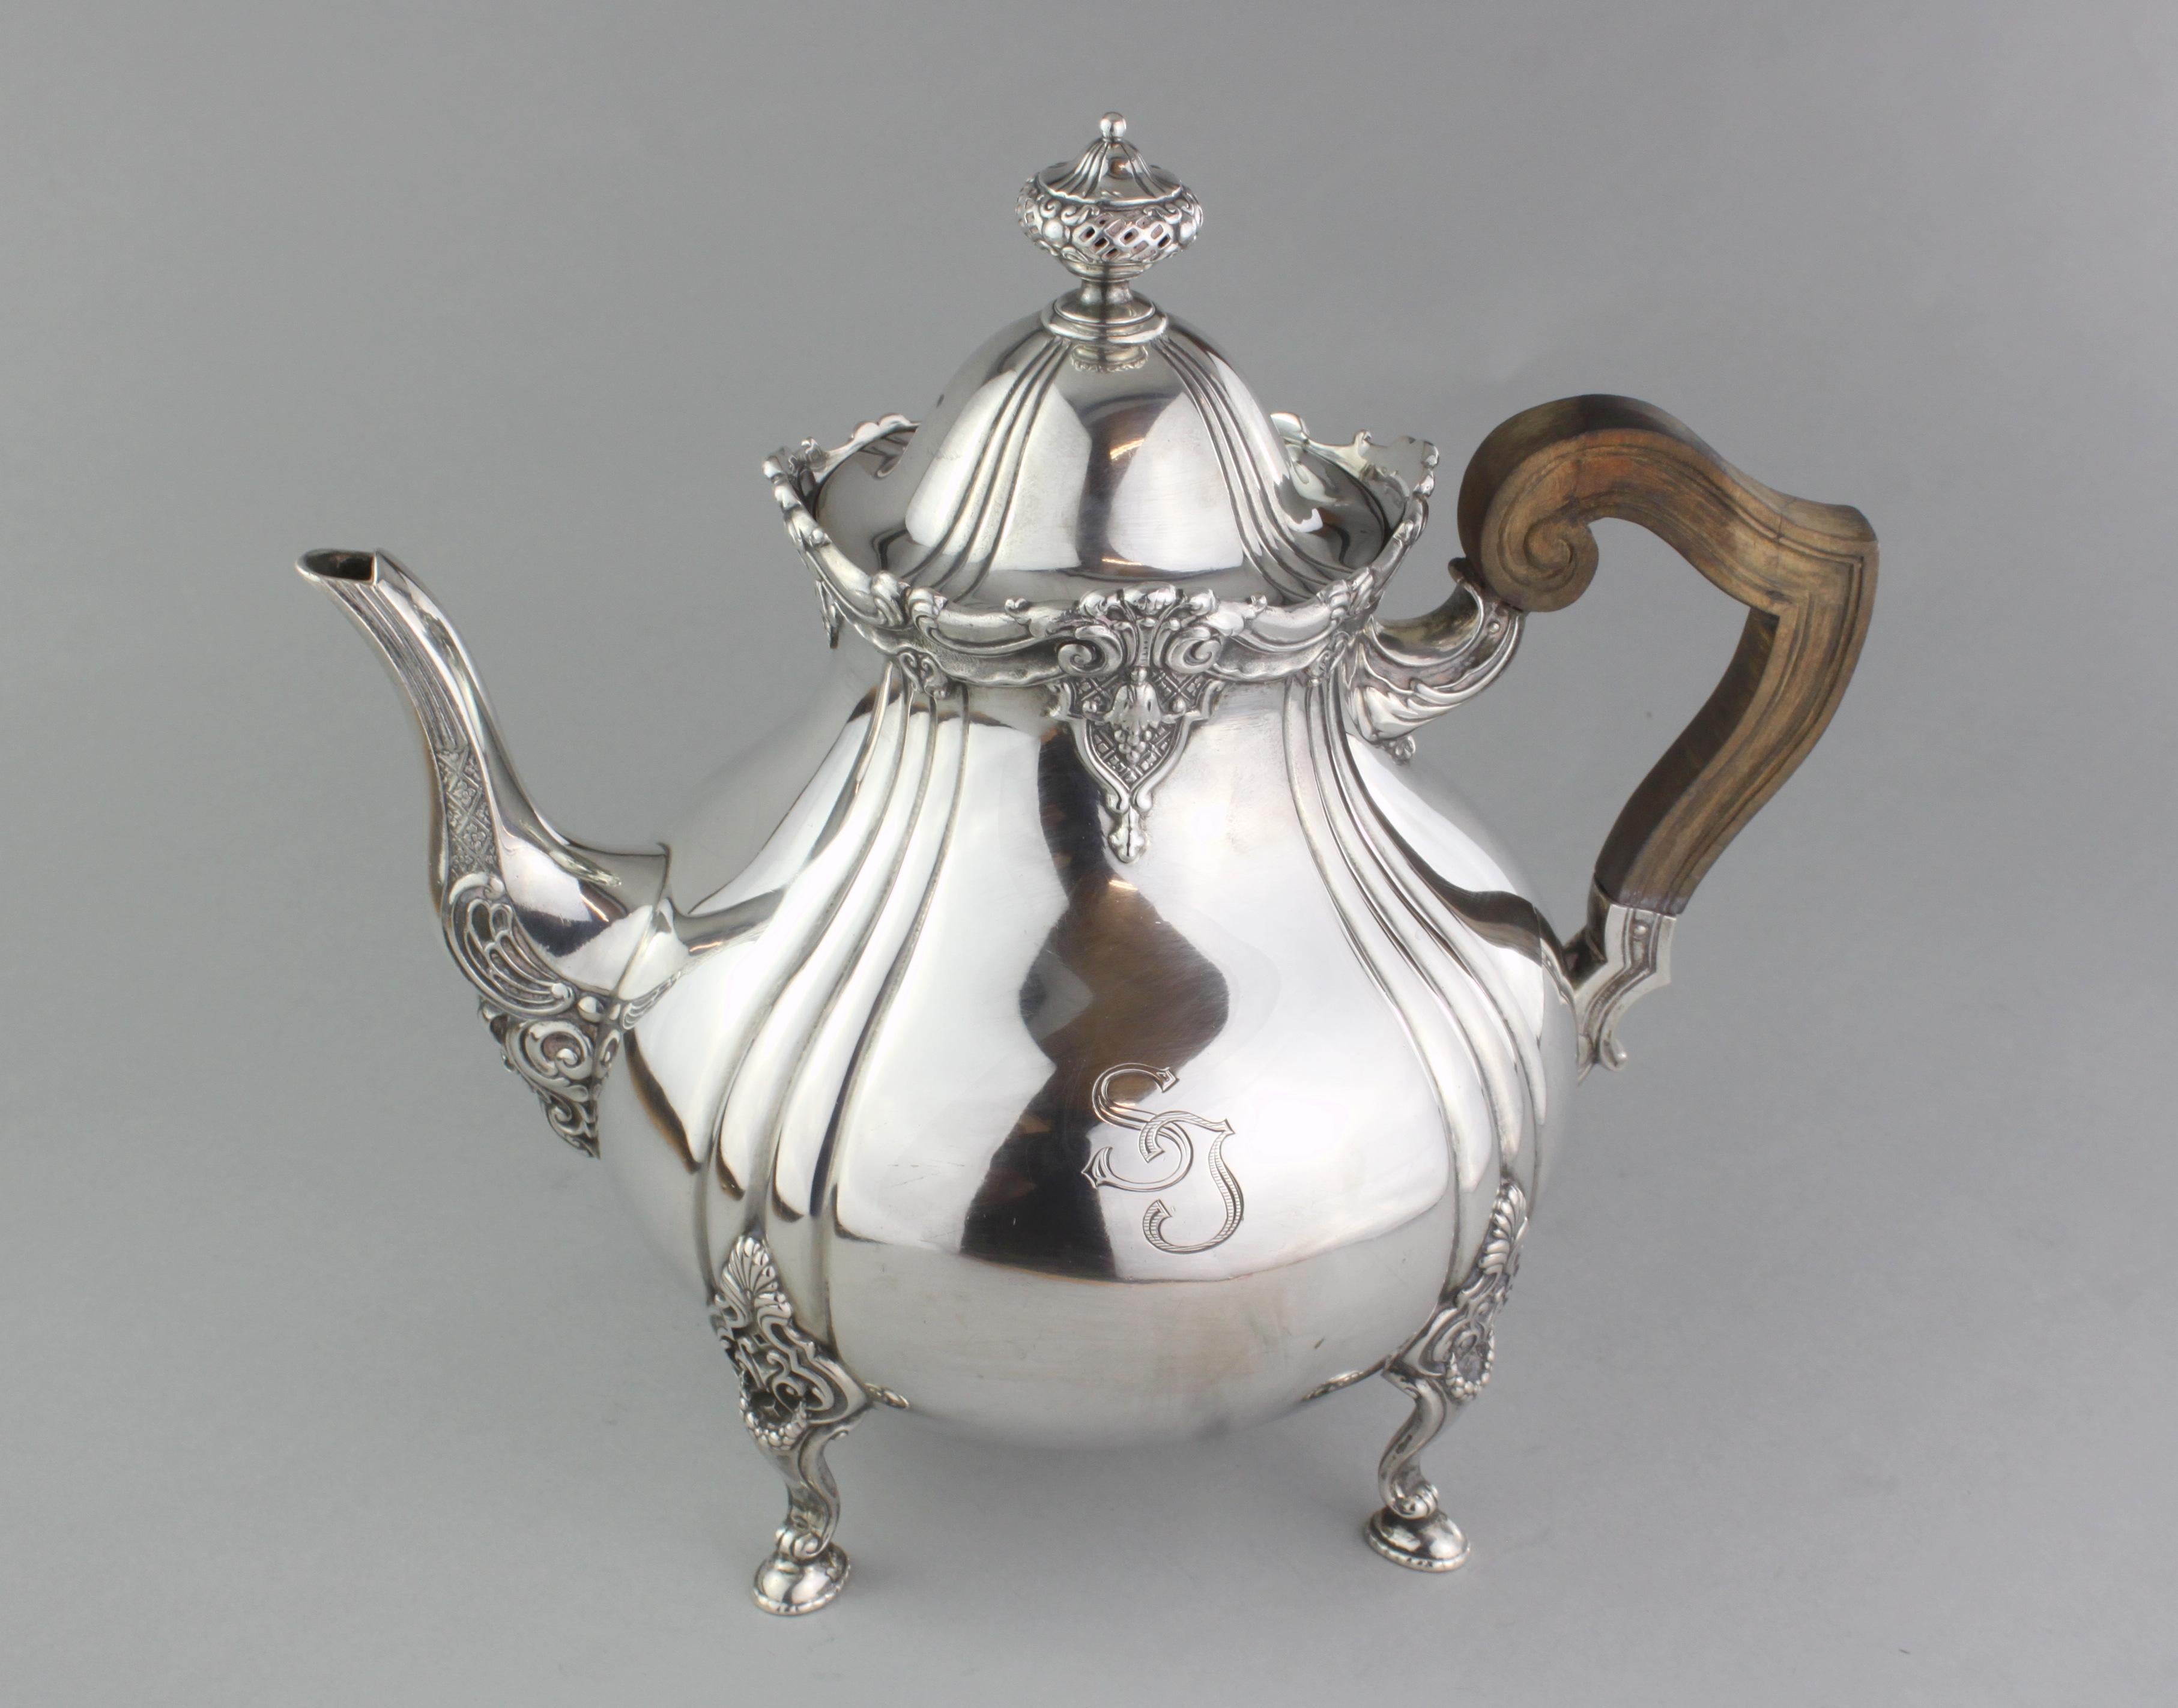 Early 20th Century Antique German Silver Teapot, by Carl Steyl, Germany, circa 1910